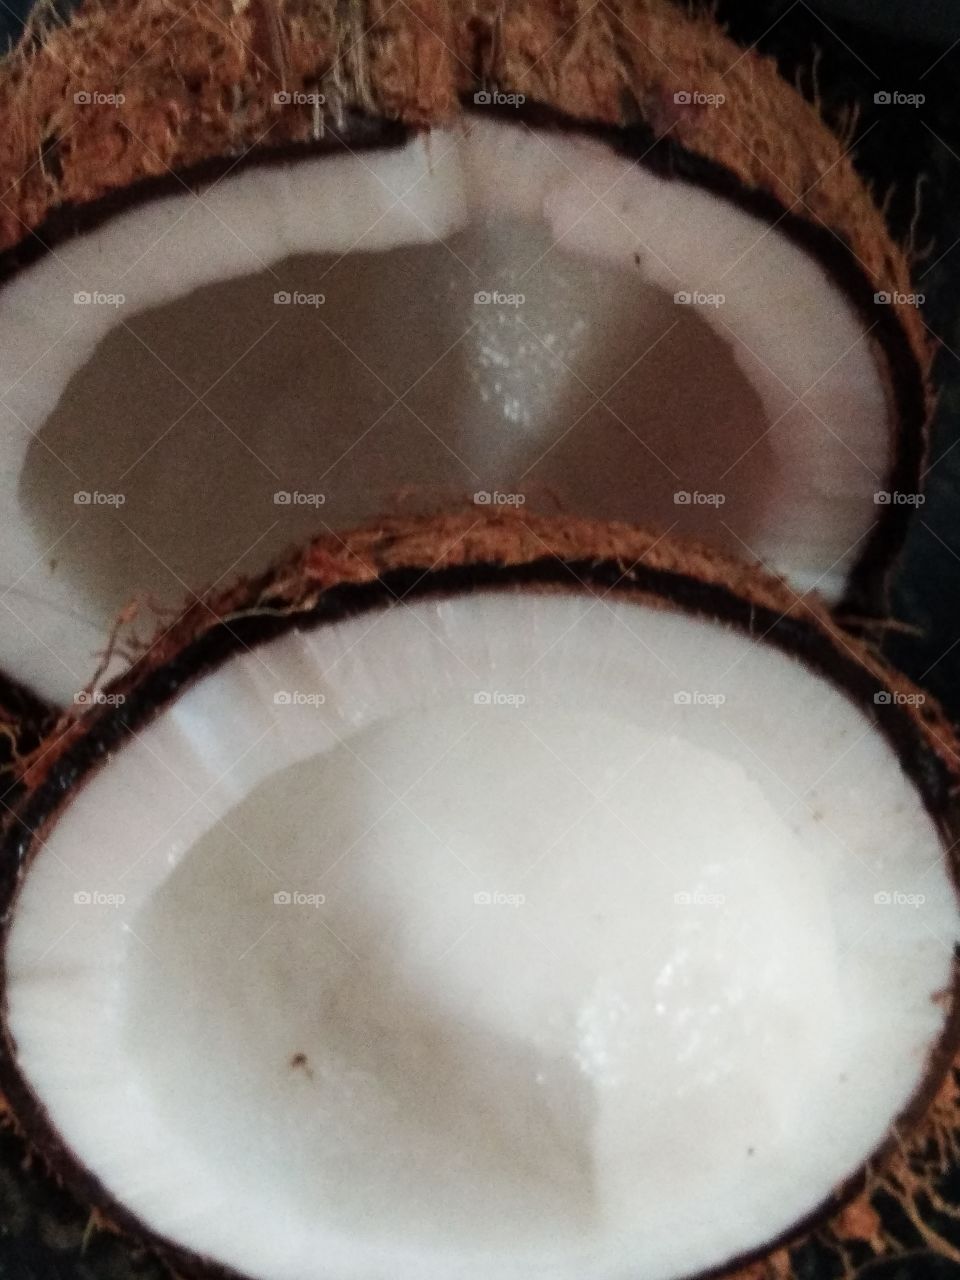 off coconut